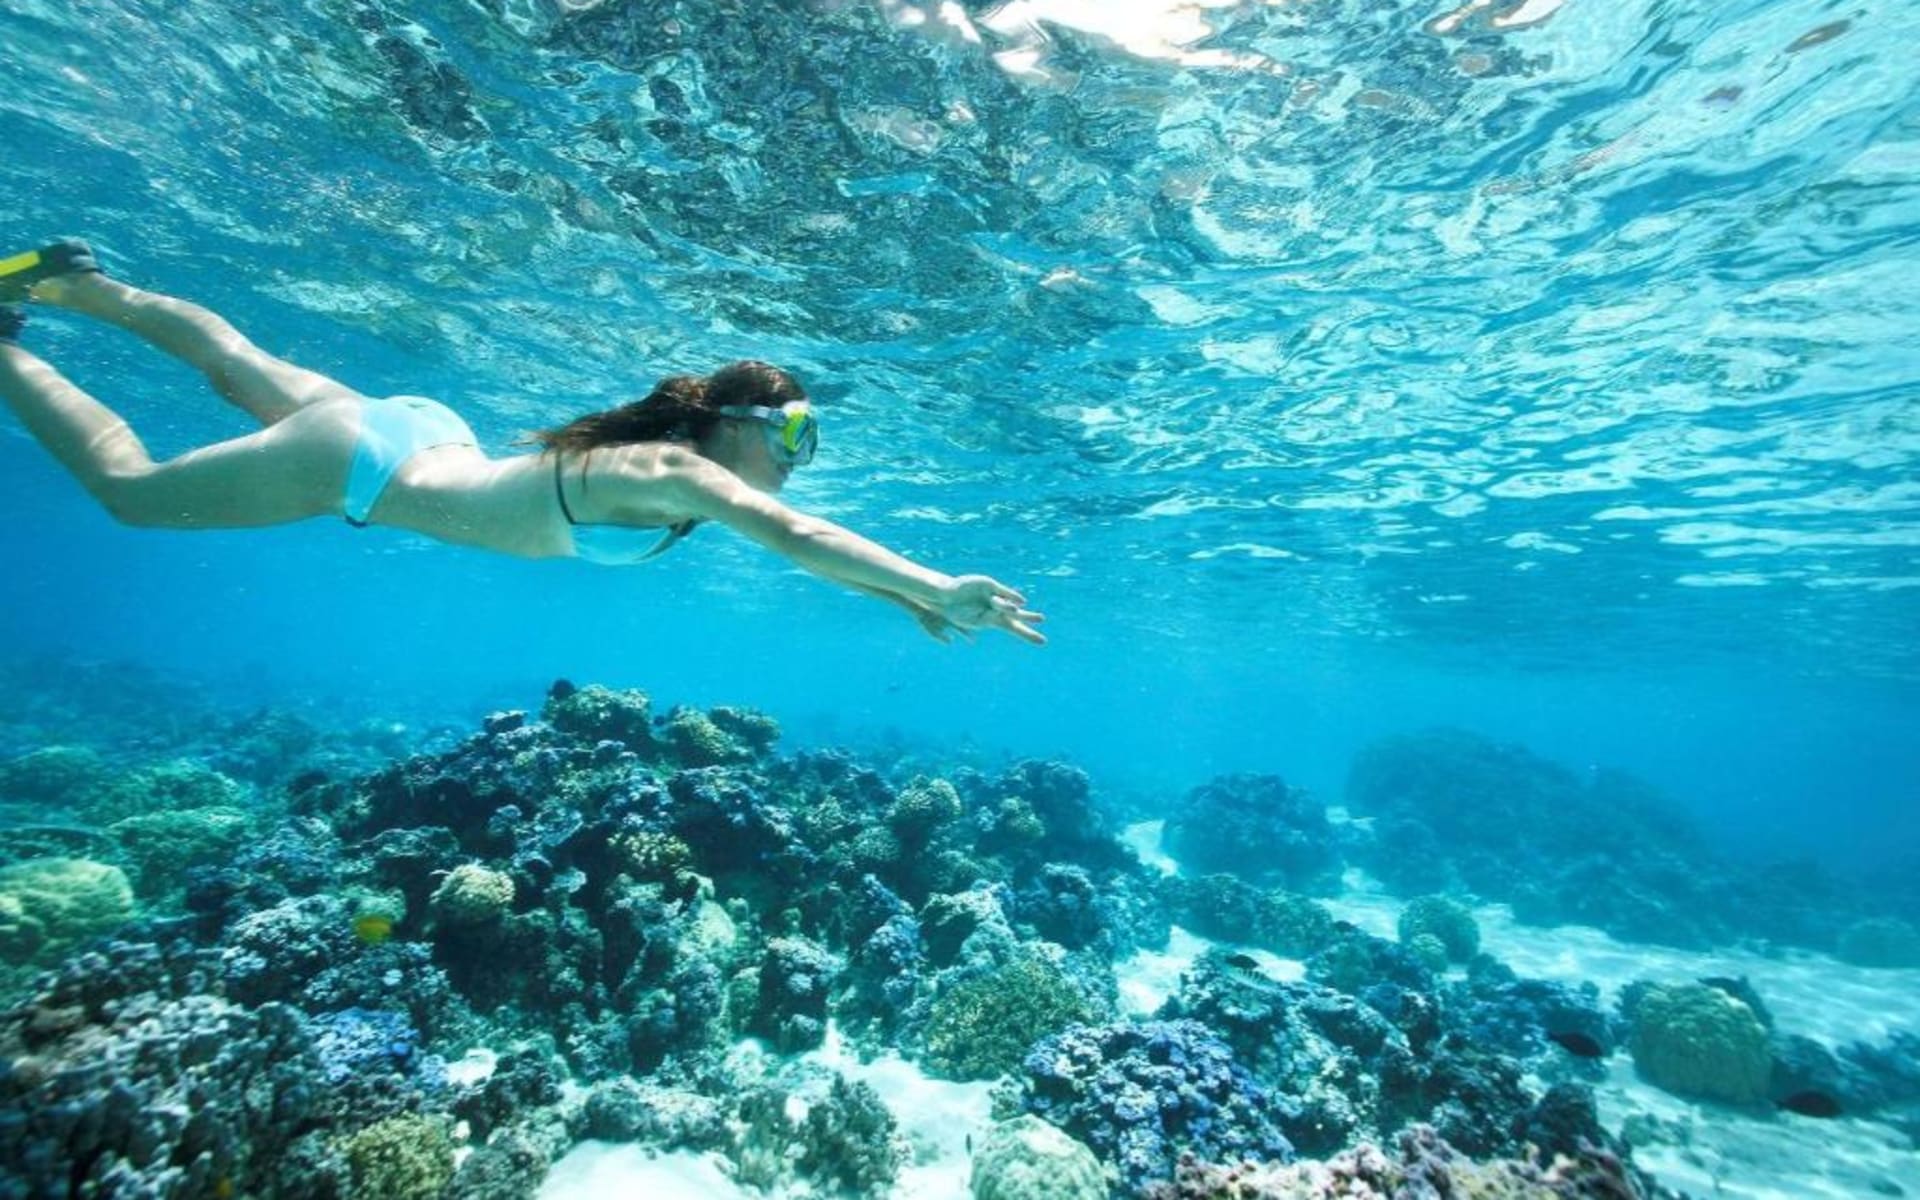 Lady snorkeling in ocean with coral